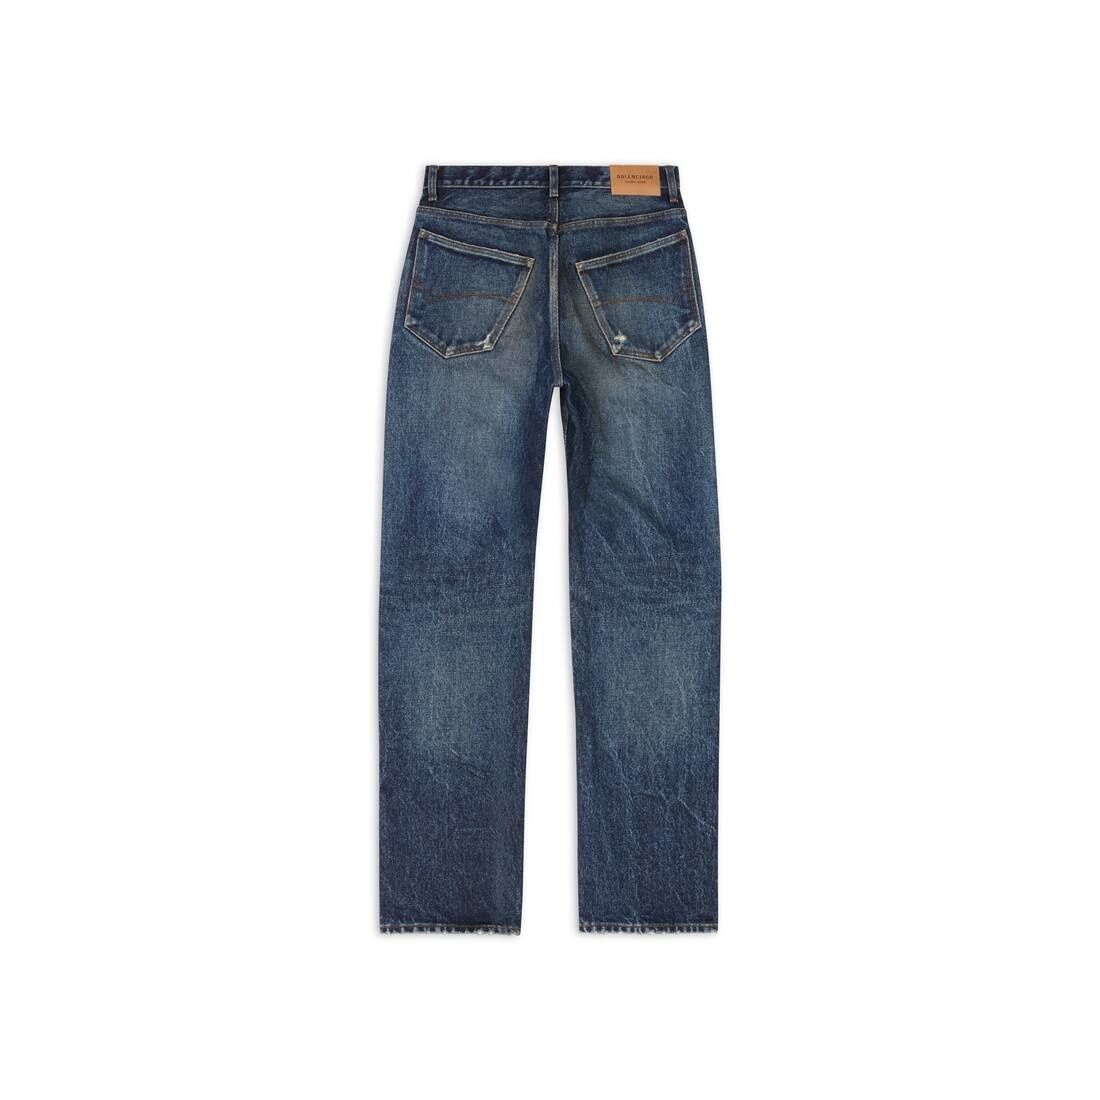 Men's Relaxed Jeans in Navy Blue - 6